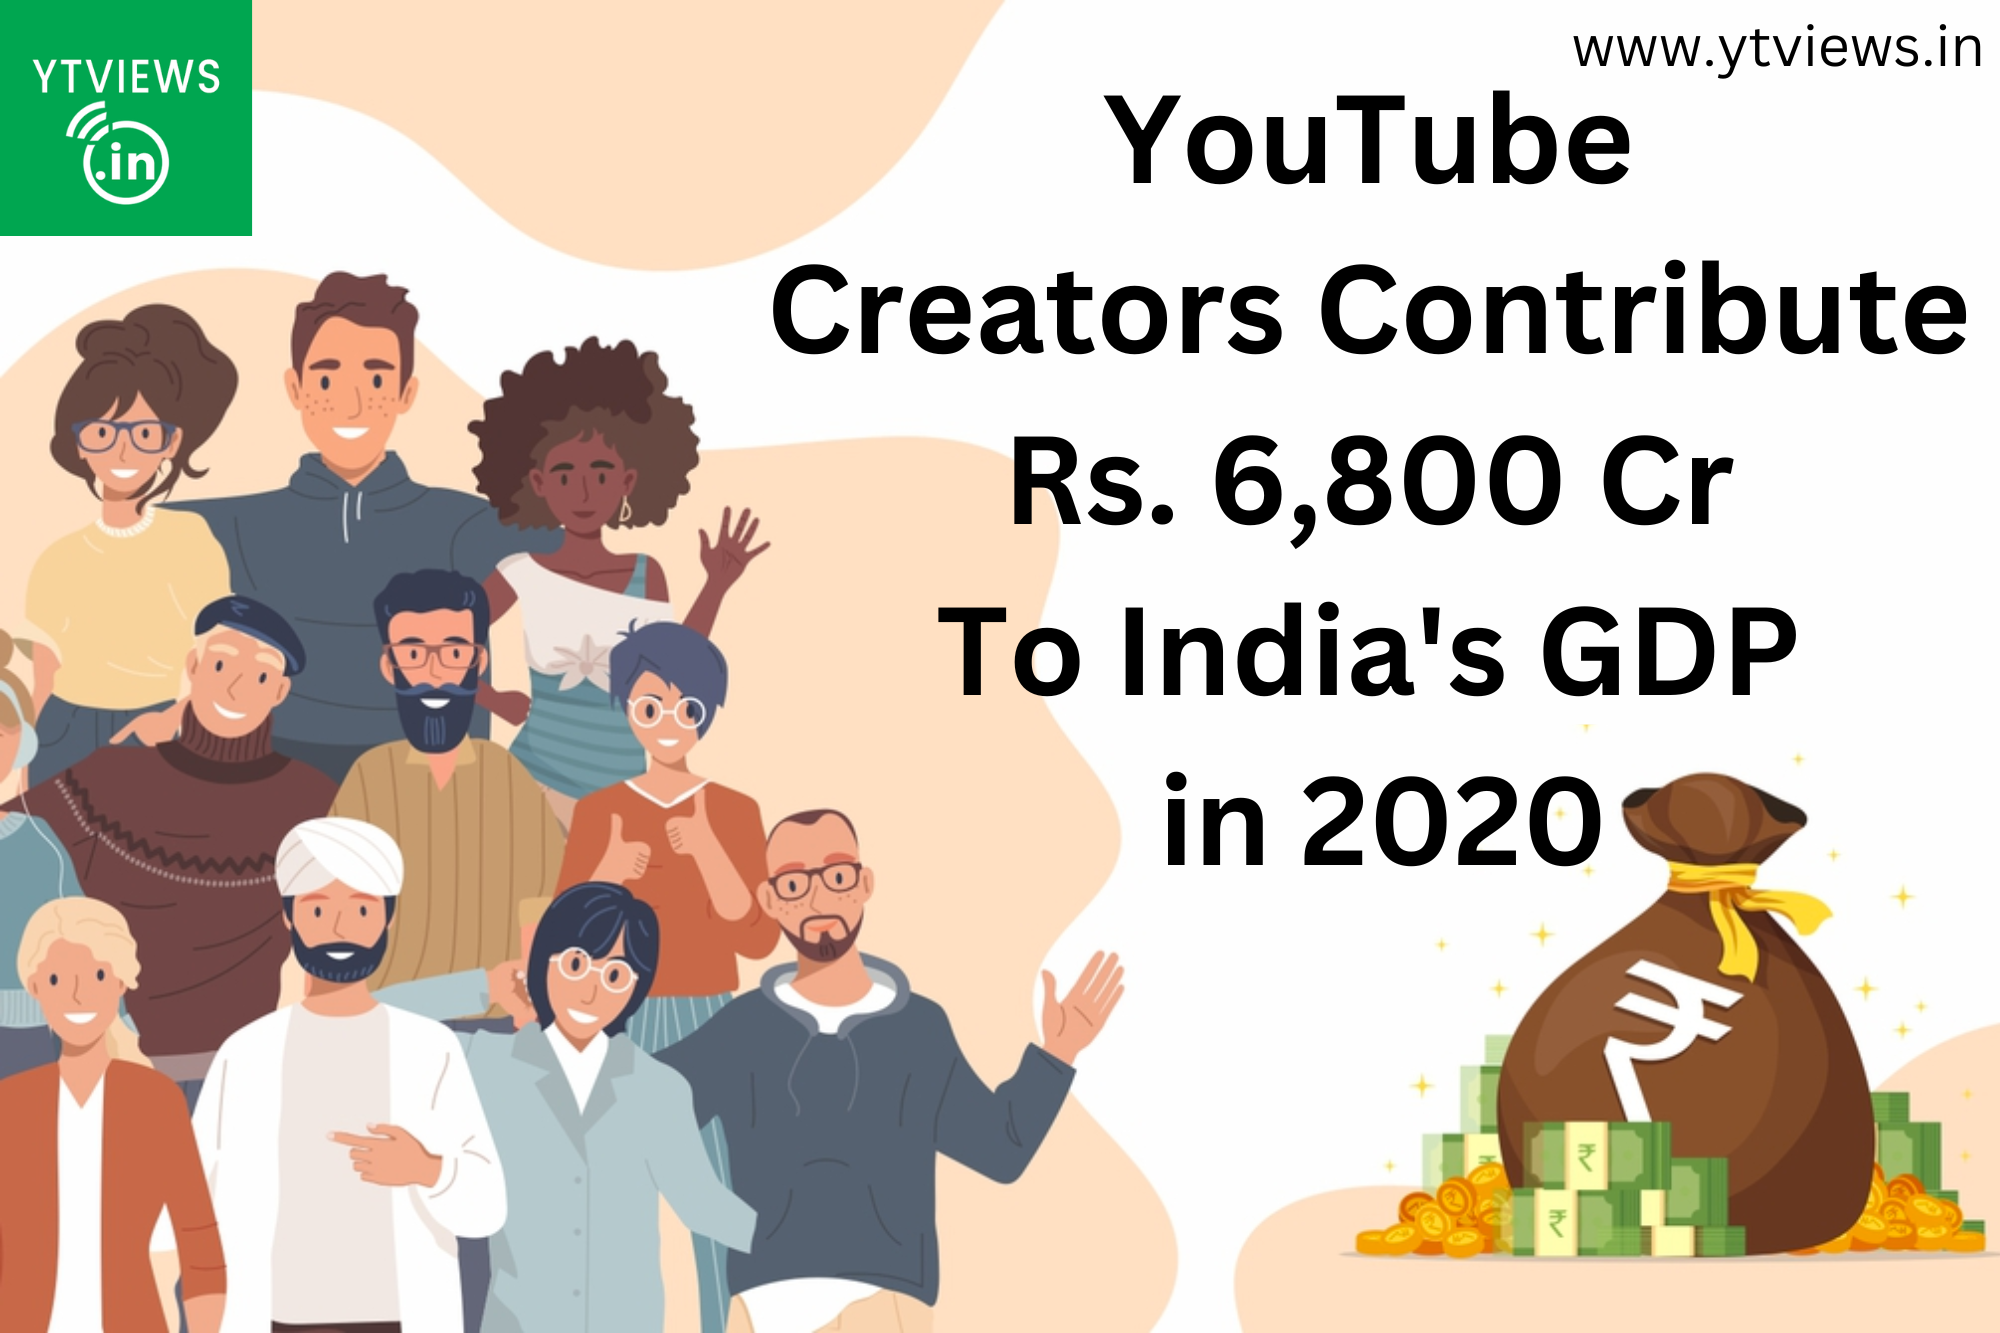 Youtube Creators contribute Rs. 6,800 Cr to India’s GDP in 2020.